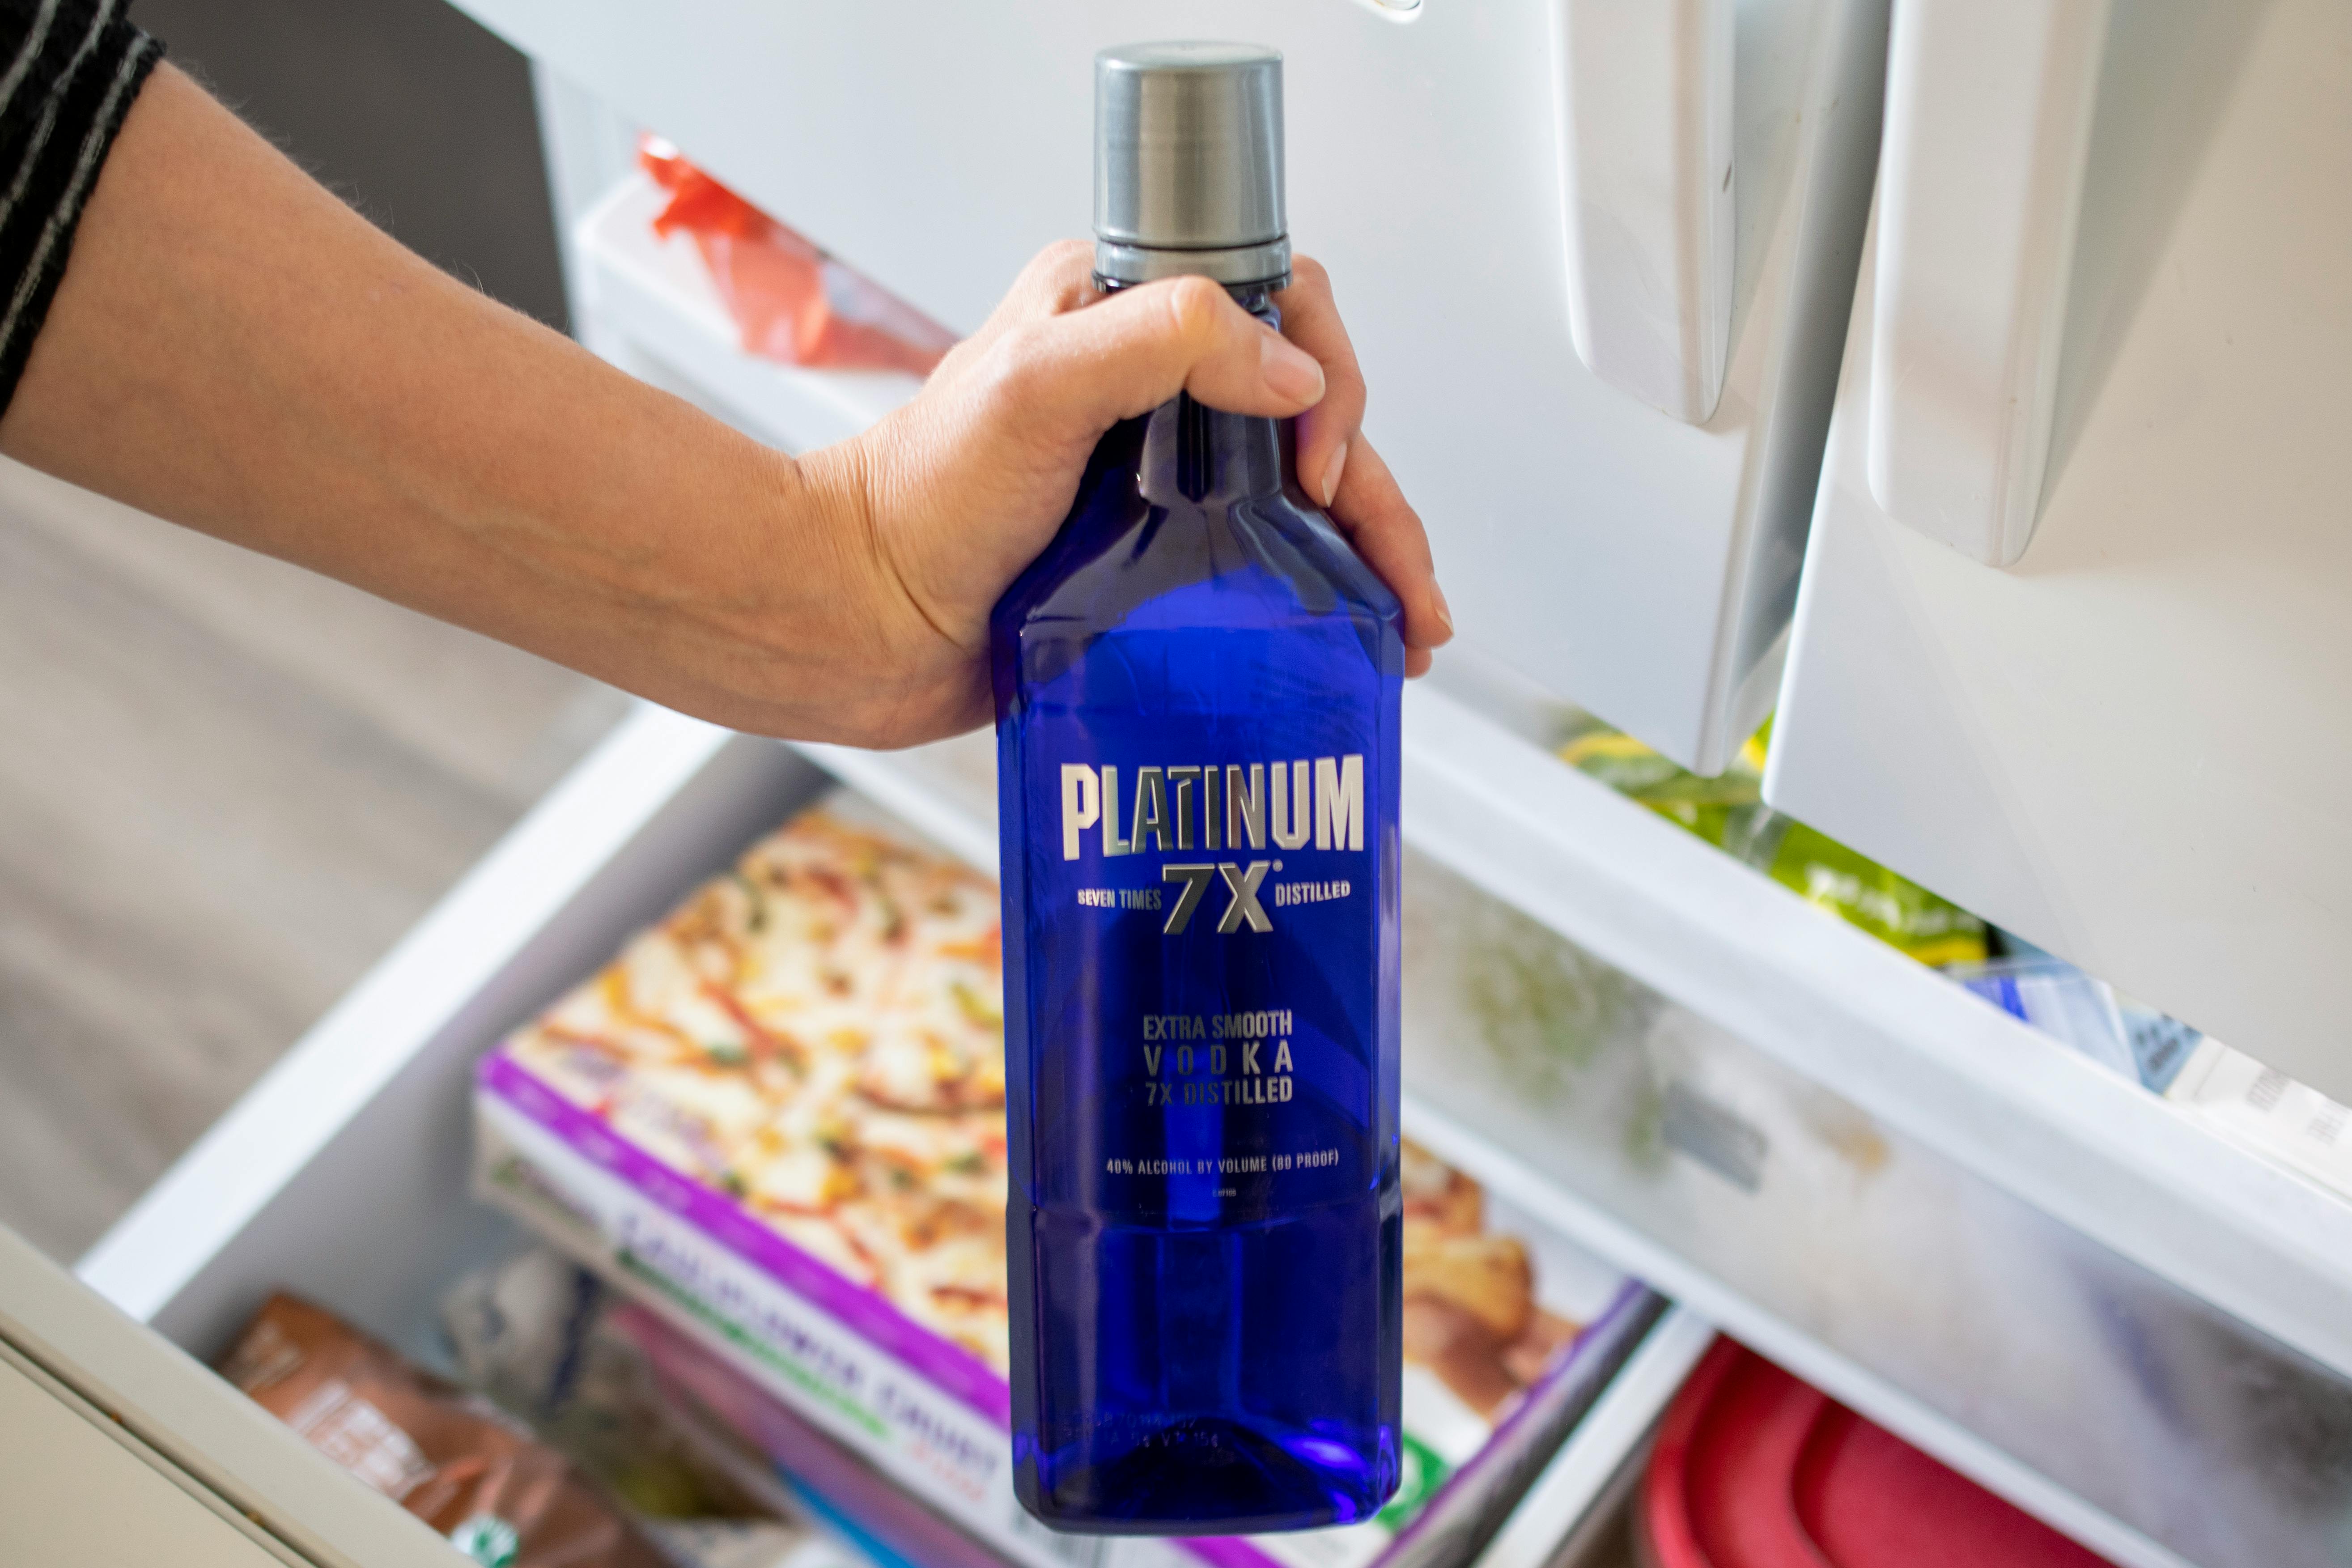 A bottle of vodka being pulled from the freezer